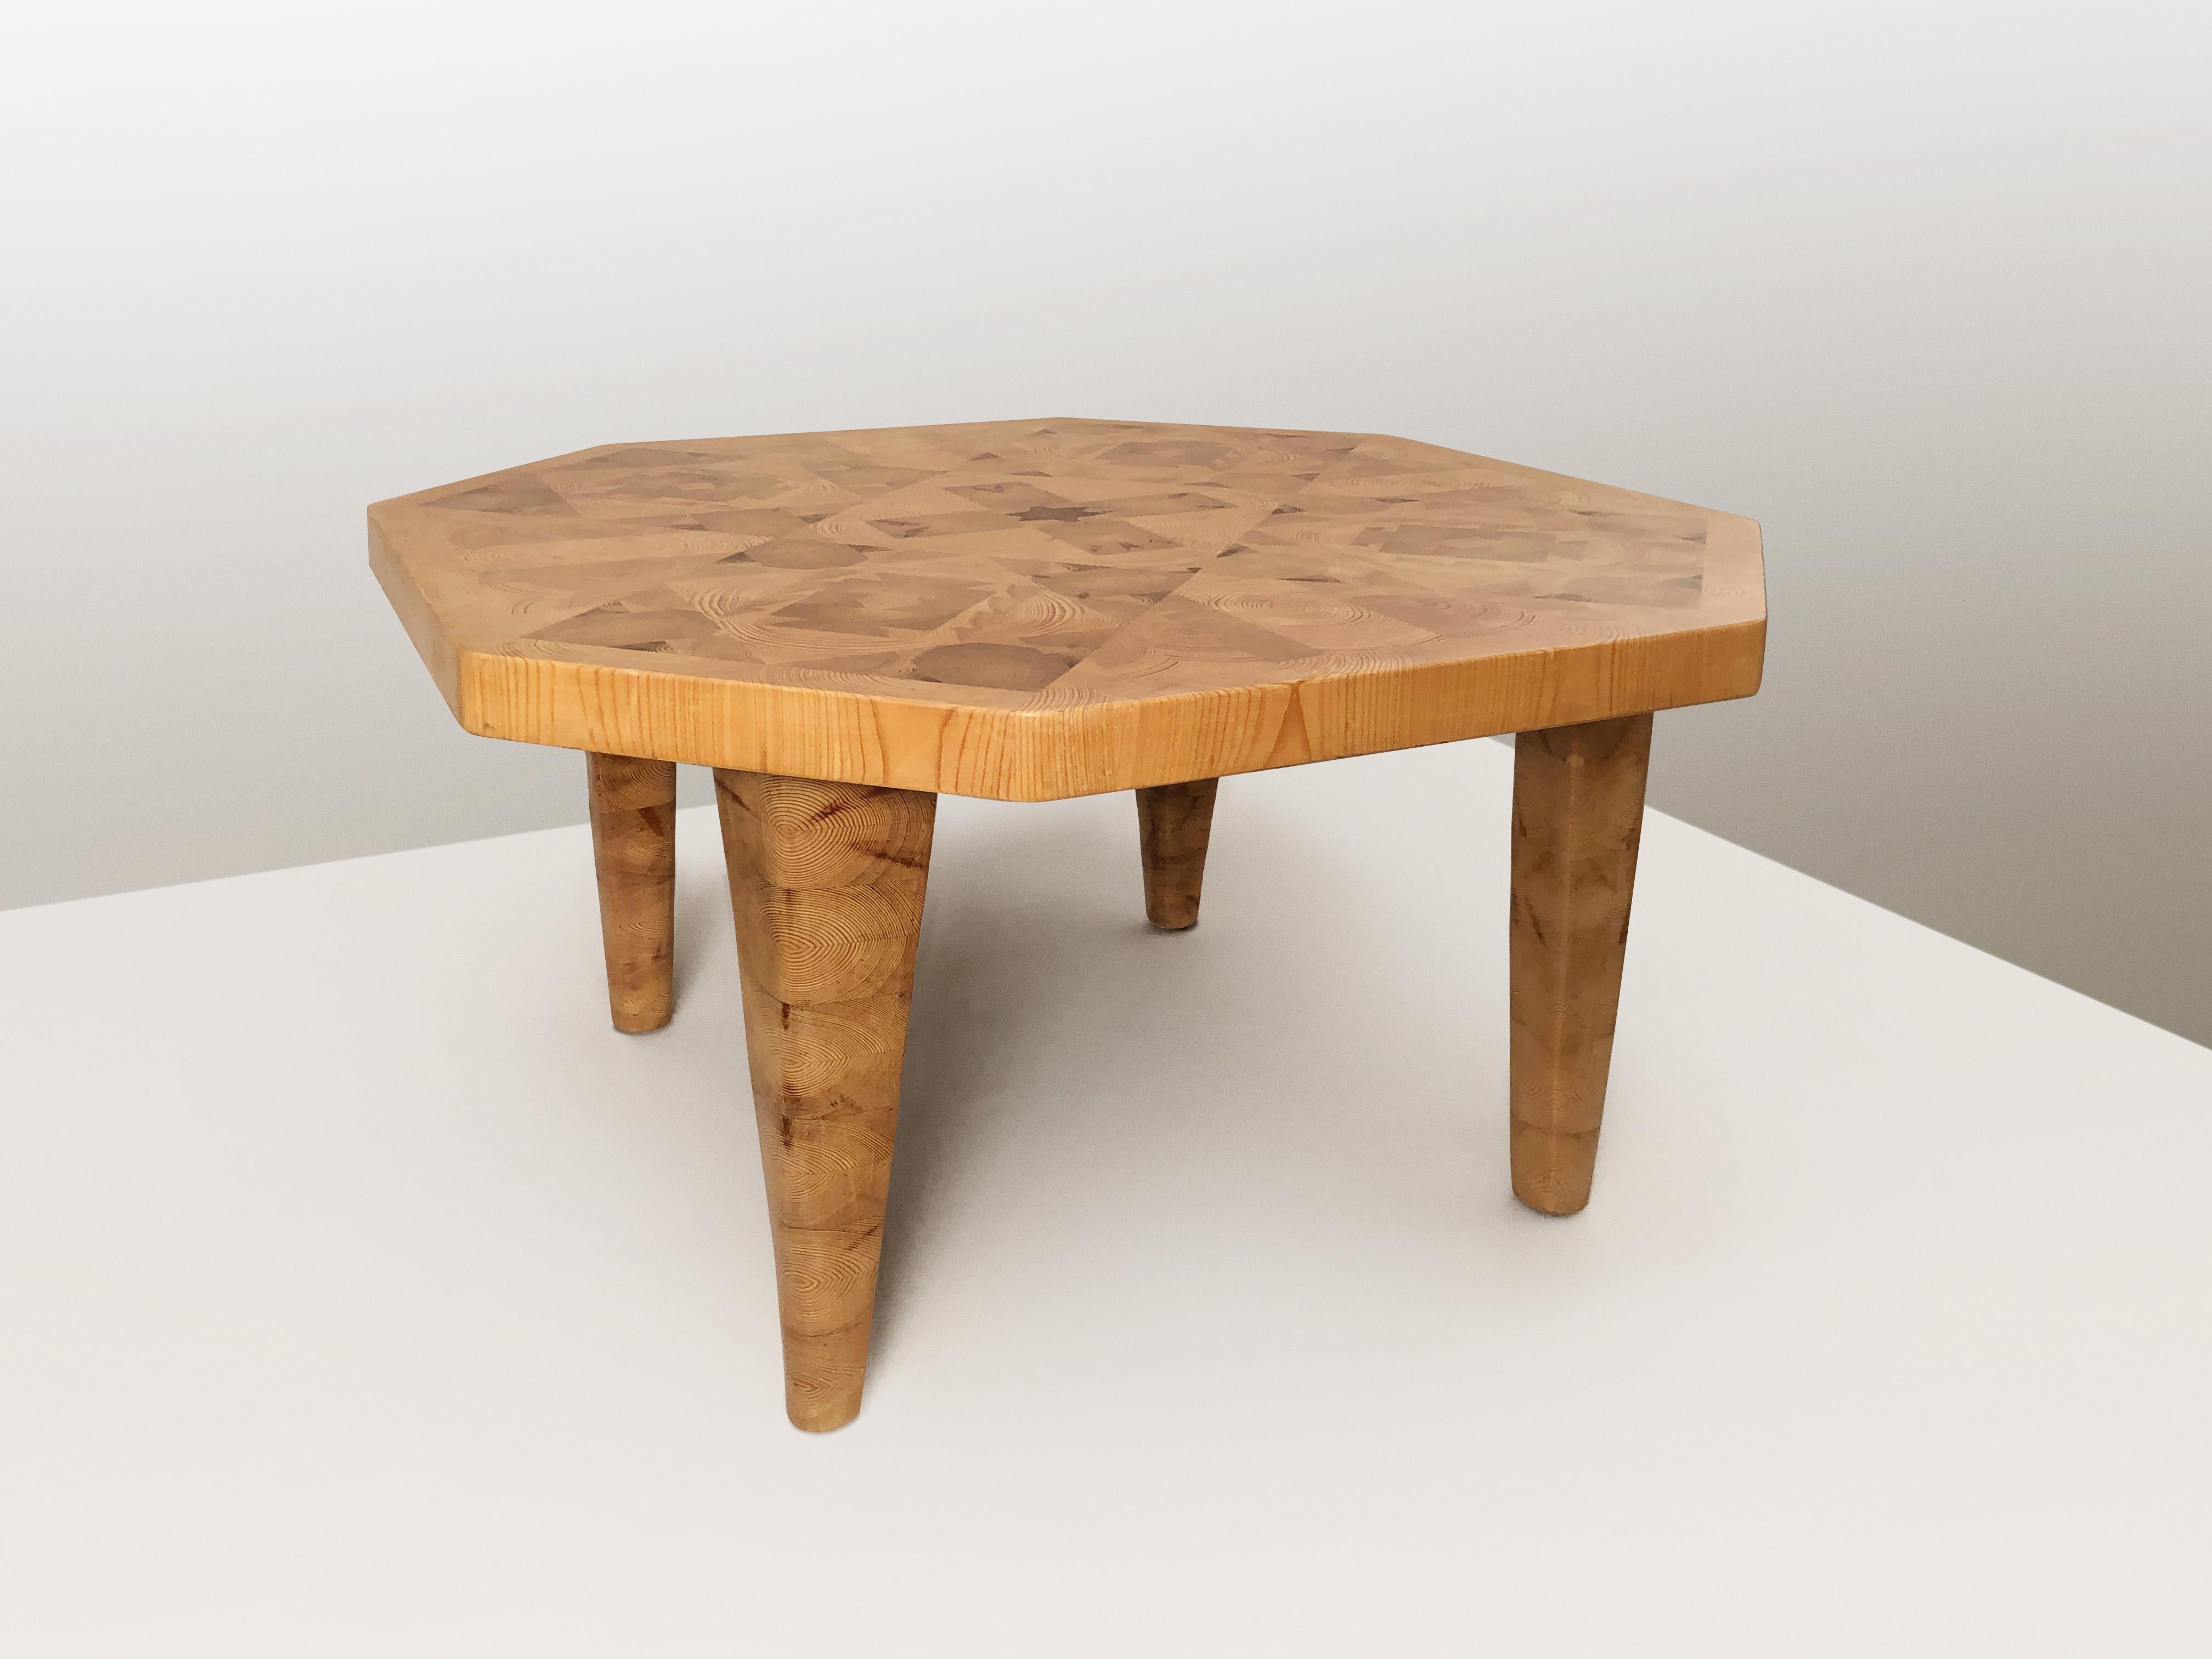 Offered for your consideration is a very rare octagonal coffee table in end grain pine mosaic by Aarre Phojolainen. Table consisting of blocks of solid pine that has been meticulously cut and arranged with the end grain cut facing upwards forming an